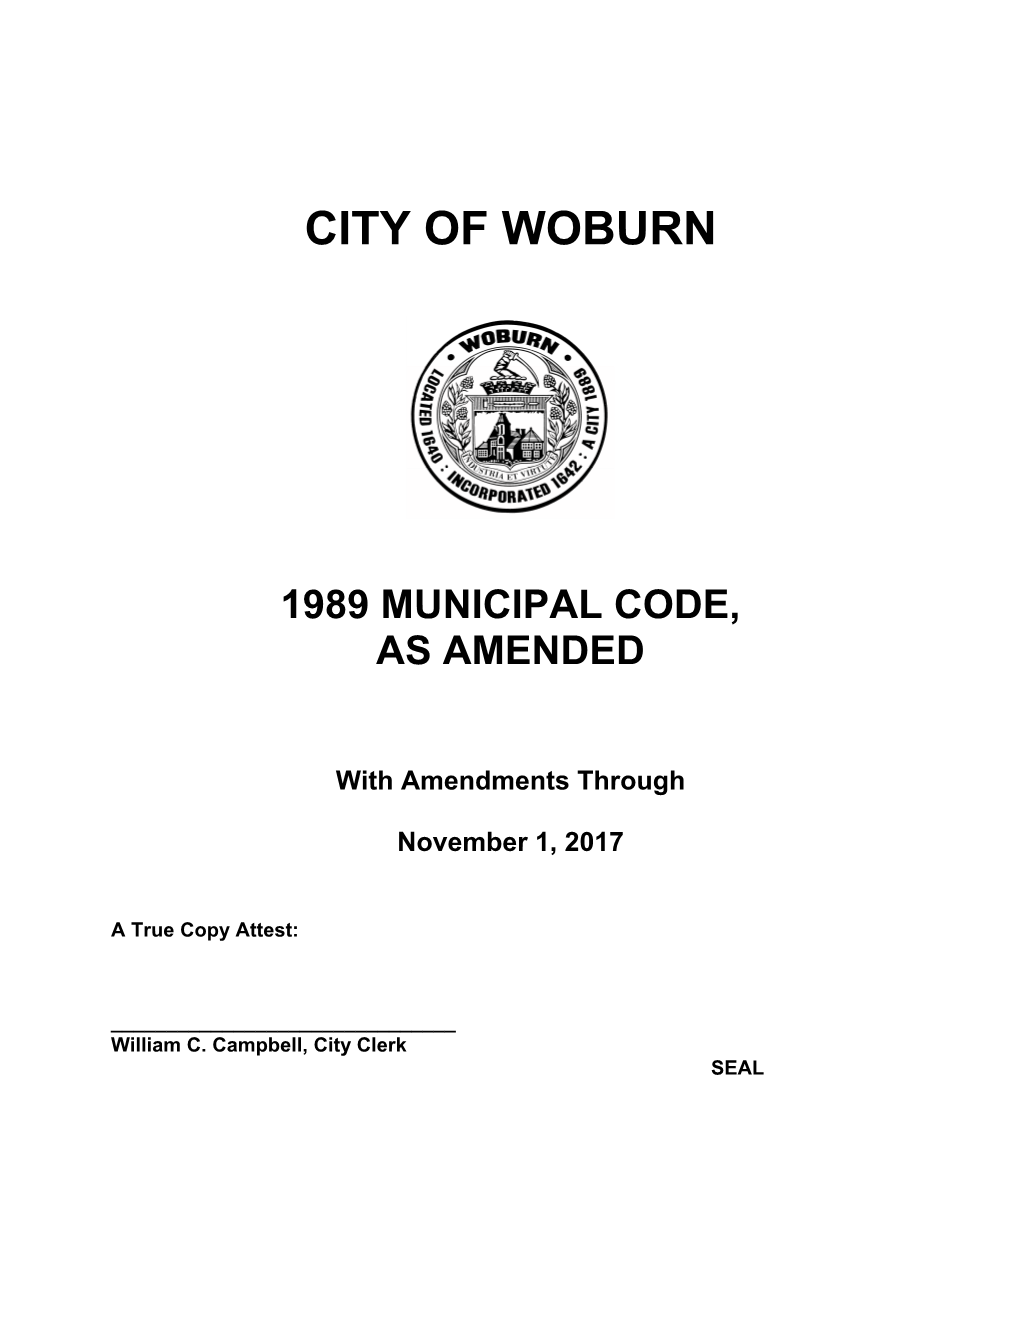 1989 Municipal Code, As Amended